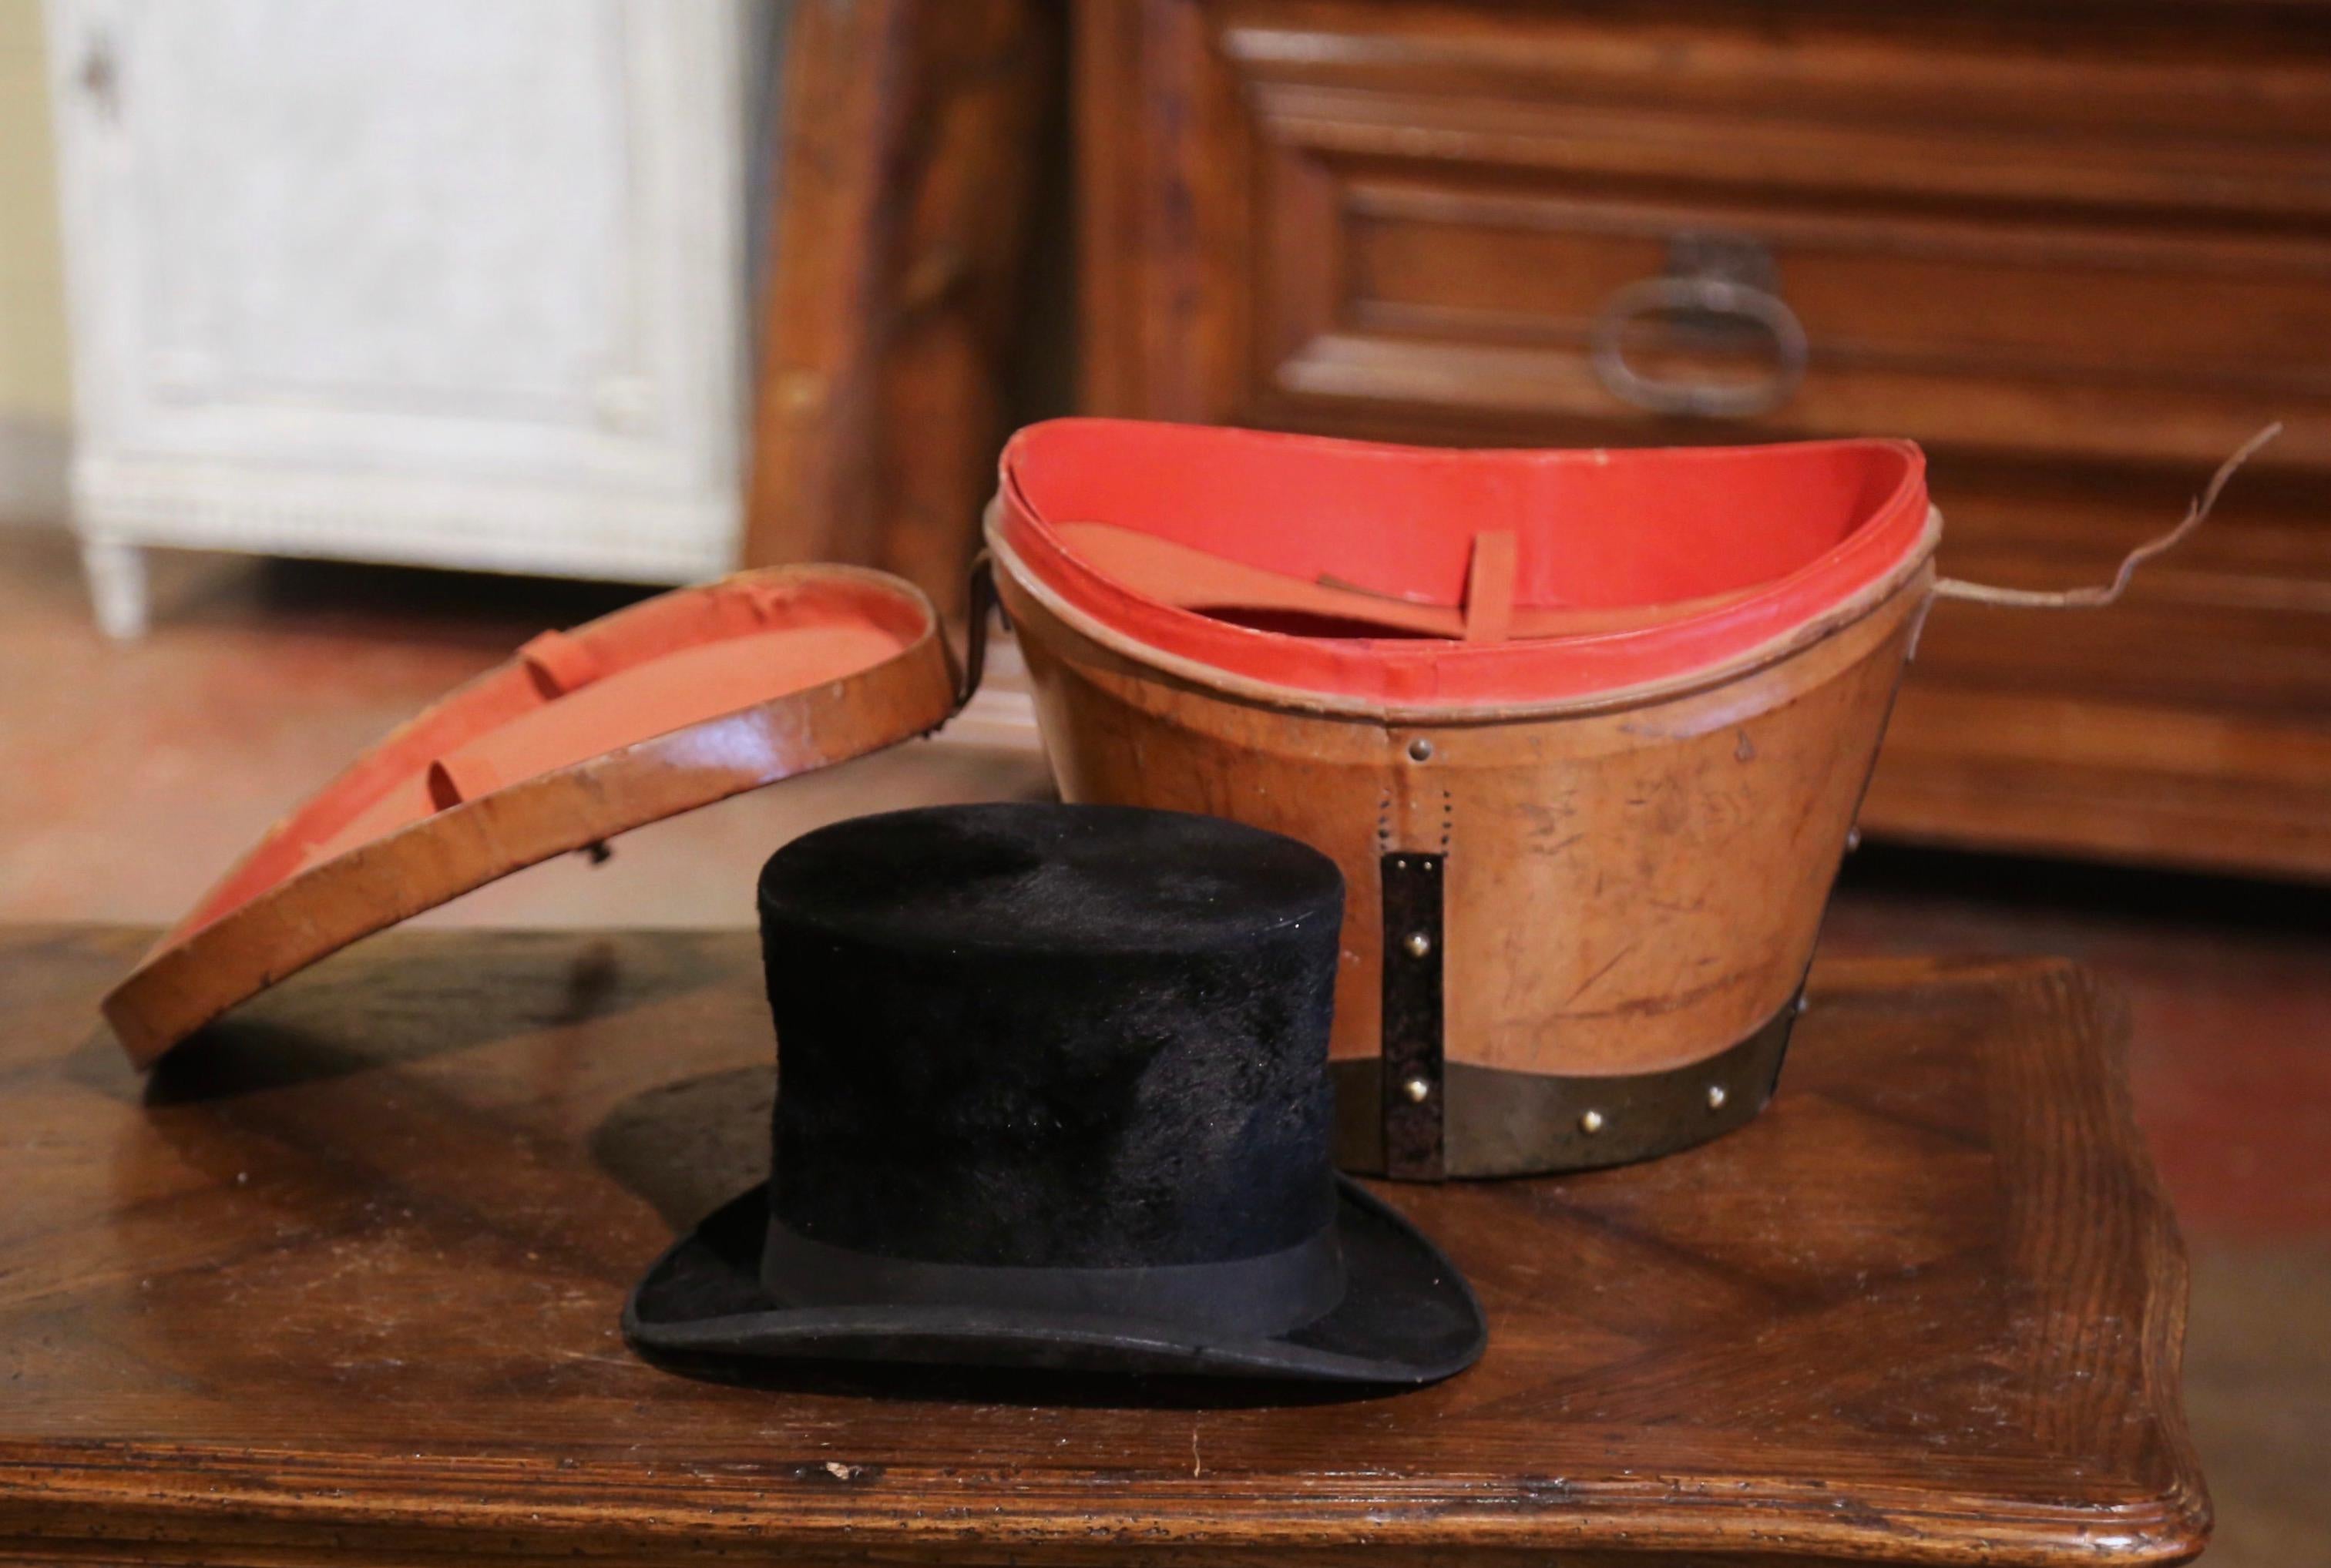 Mid-19th Century French Oval Pigskin Leather Hat Box with Original Top Hat For Sale 1